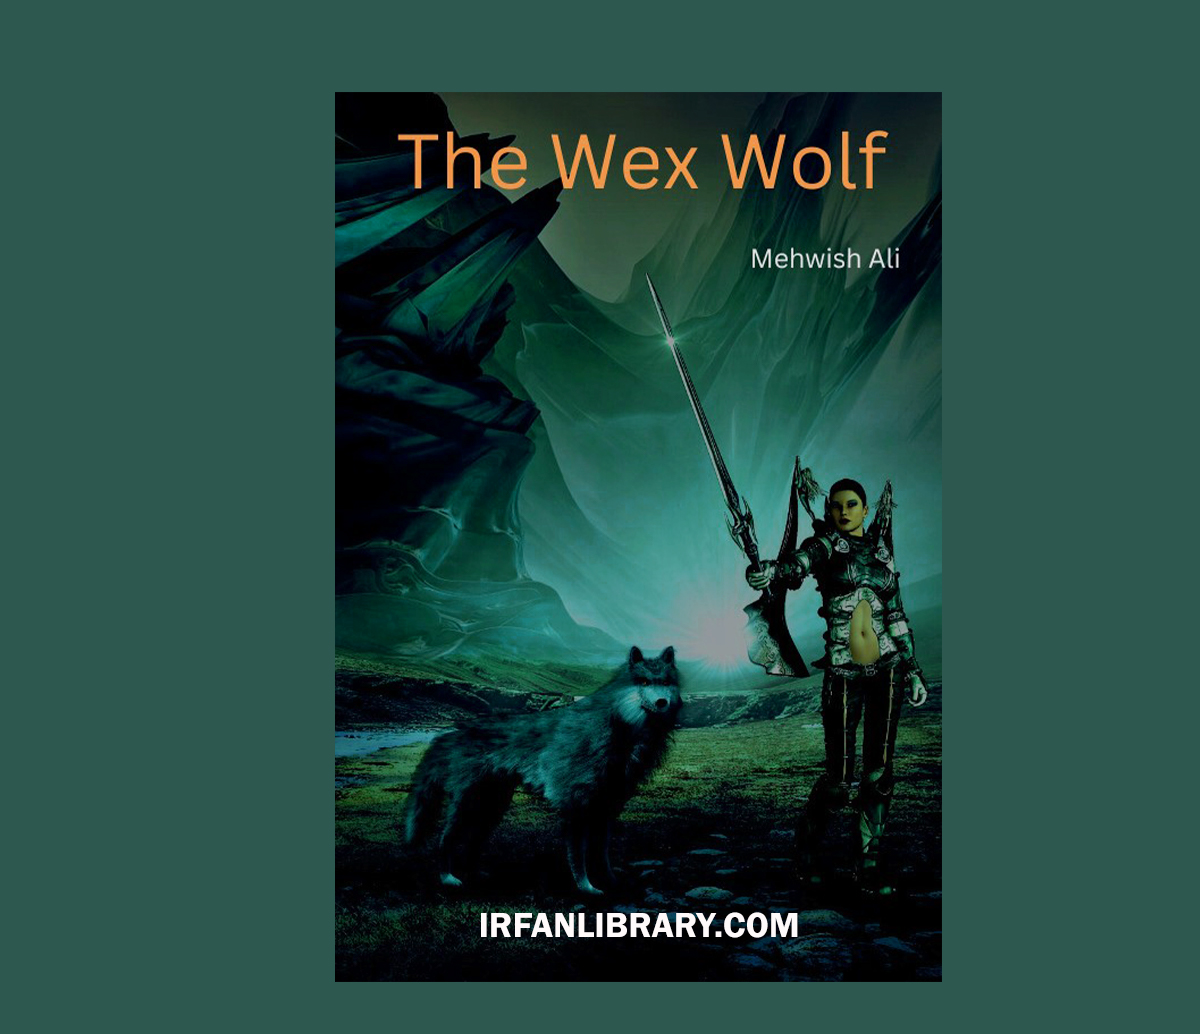 The Wex Wolf Novel by Mehwish Ali